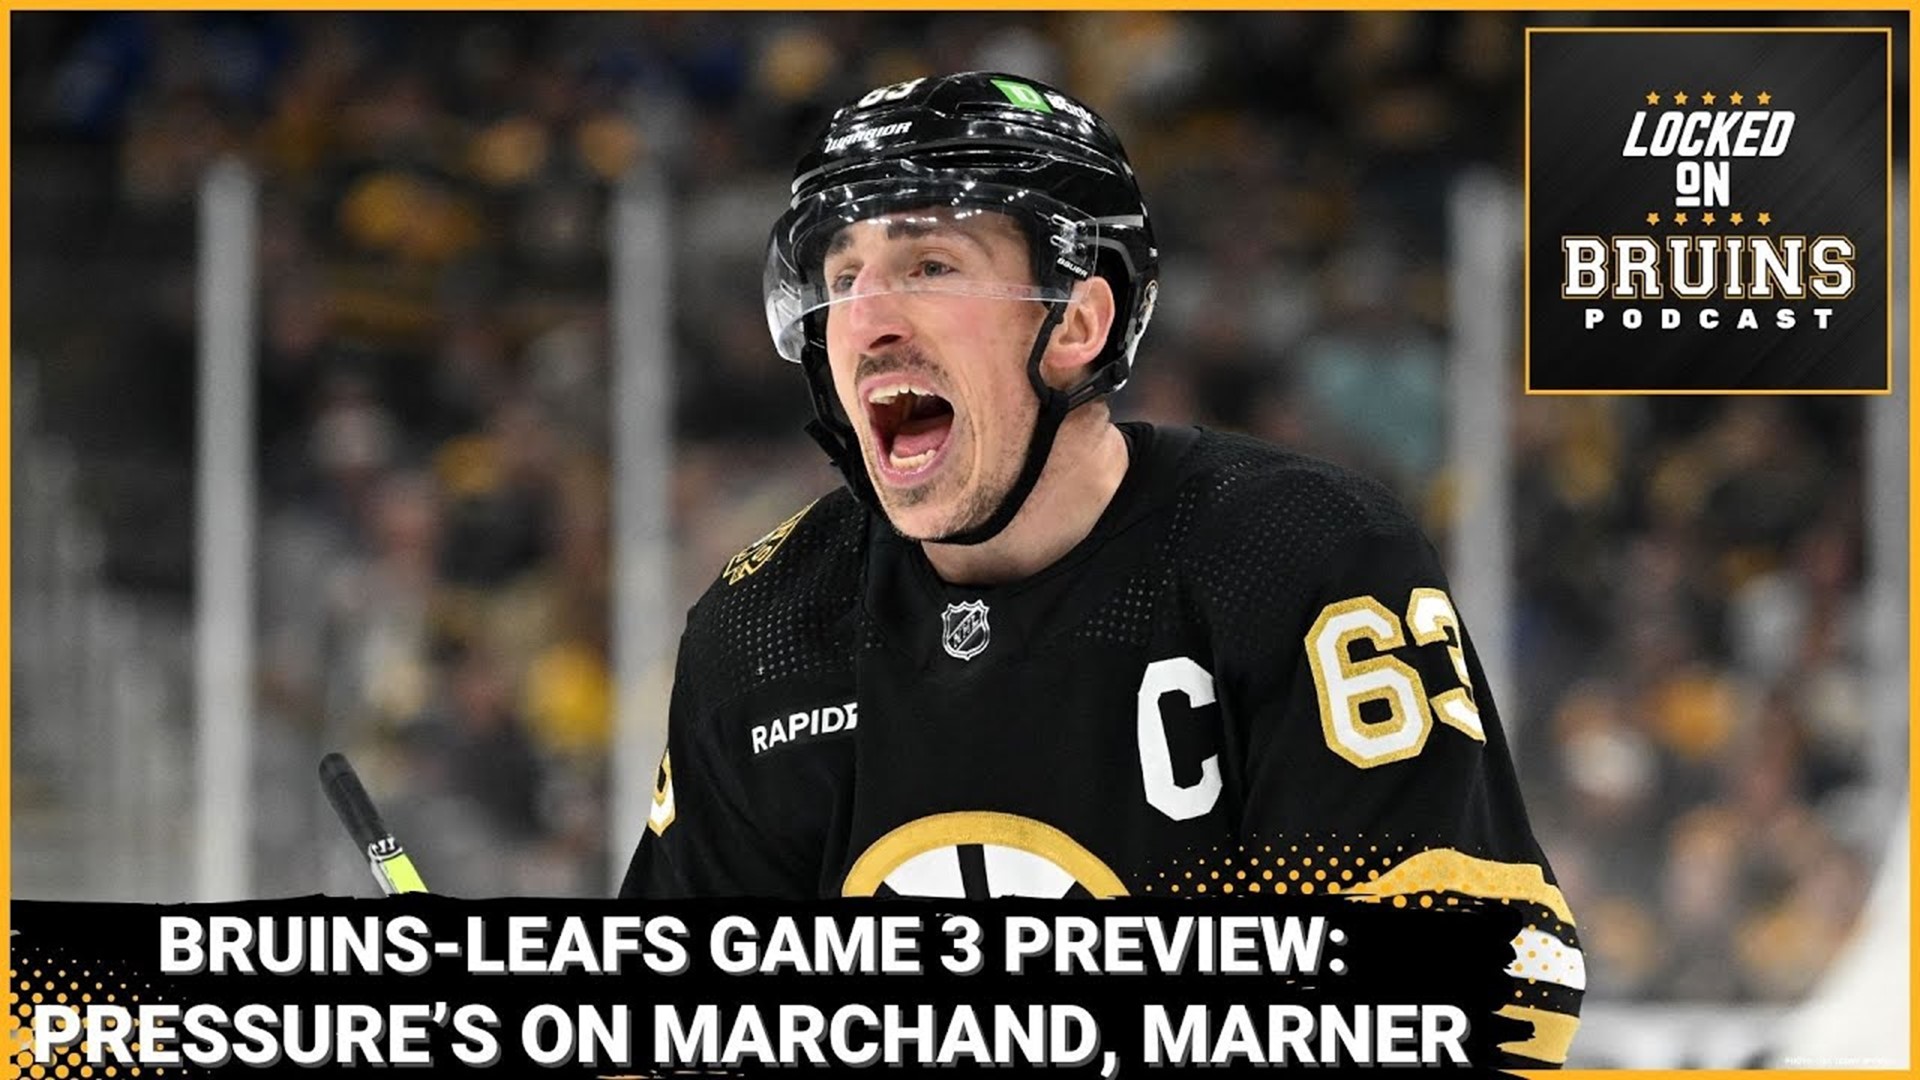 Boston Bruins - Toronto Maple Leafs Game 3 Preview. Why Marchand, Marner are facing pressure